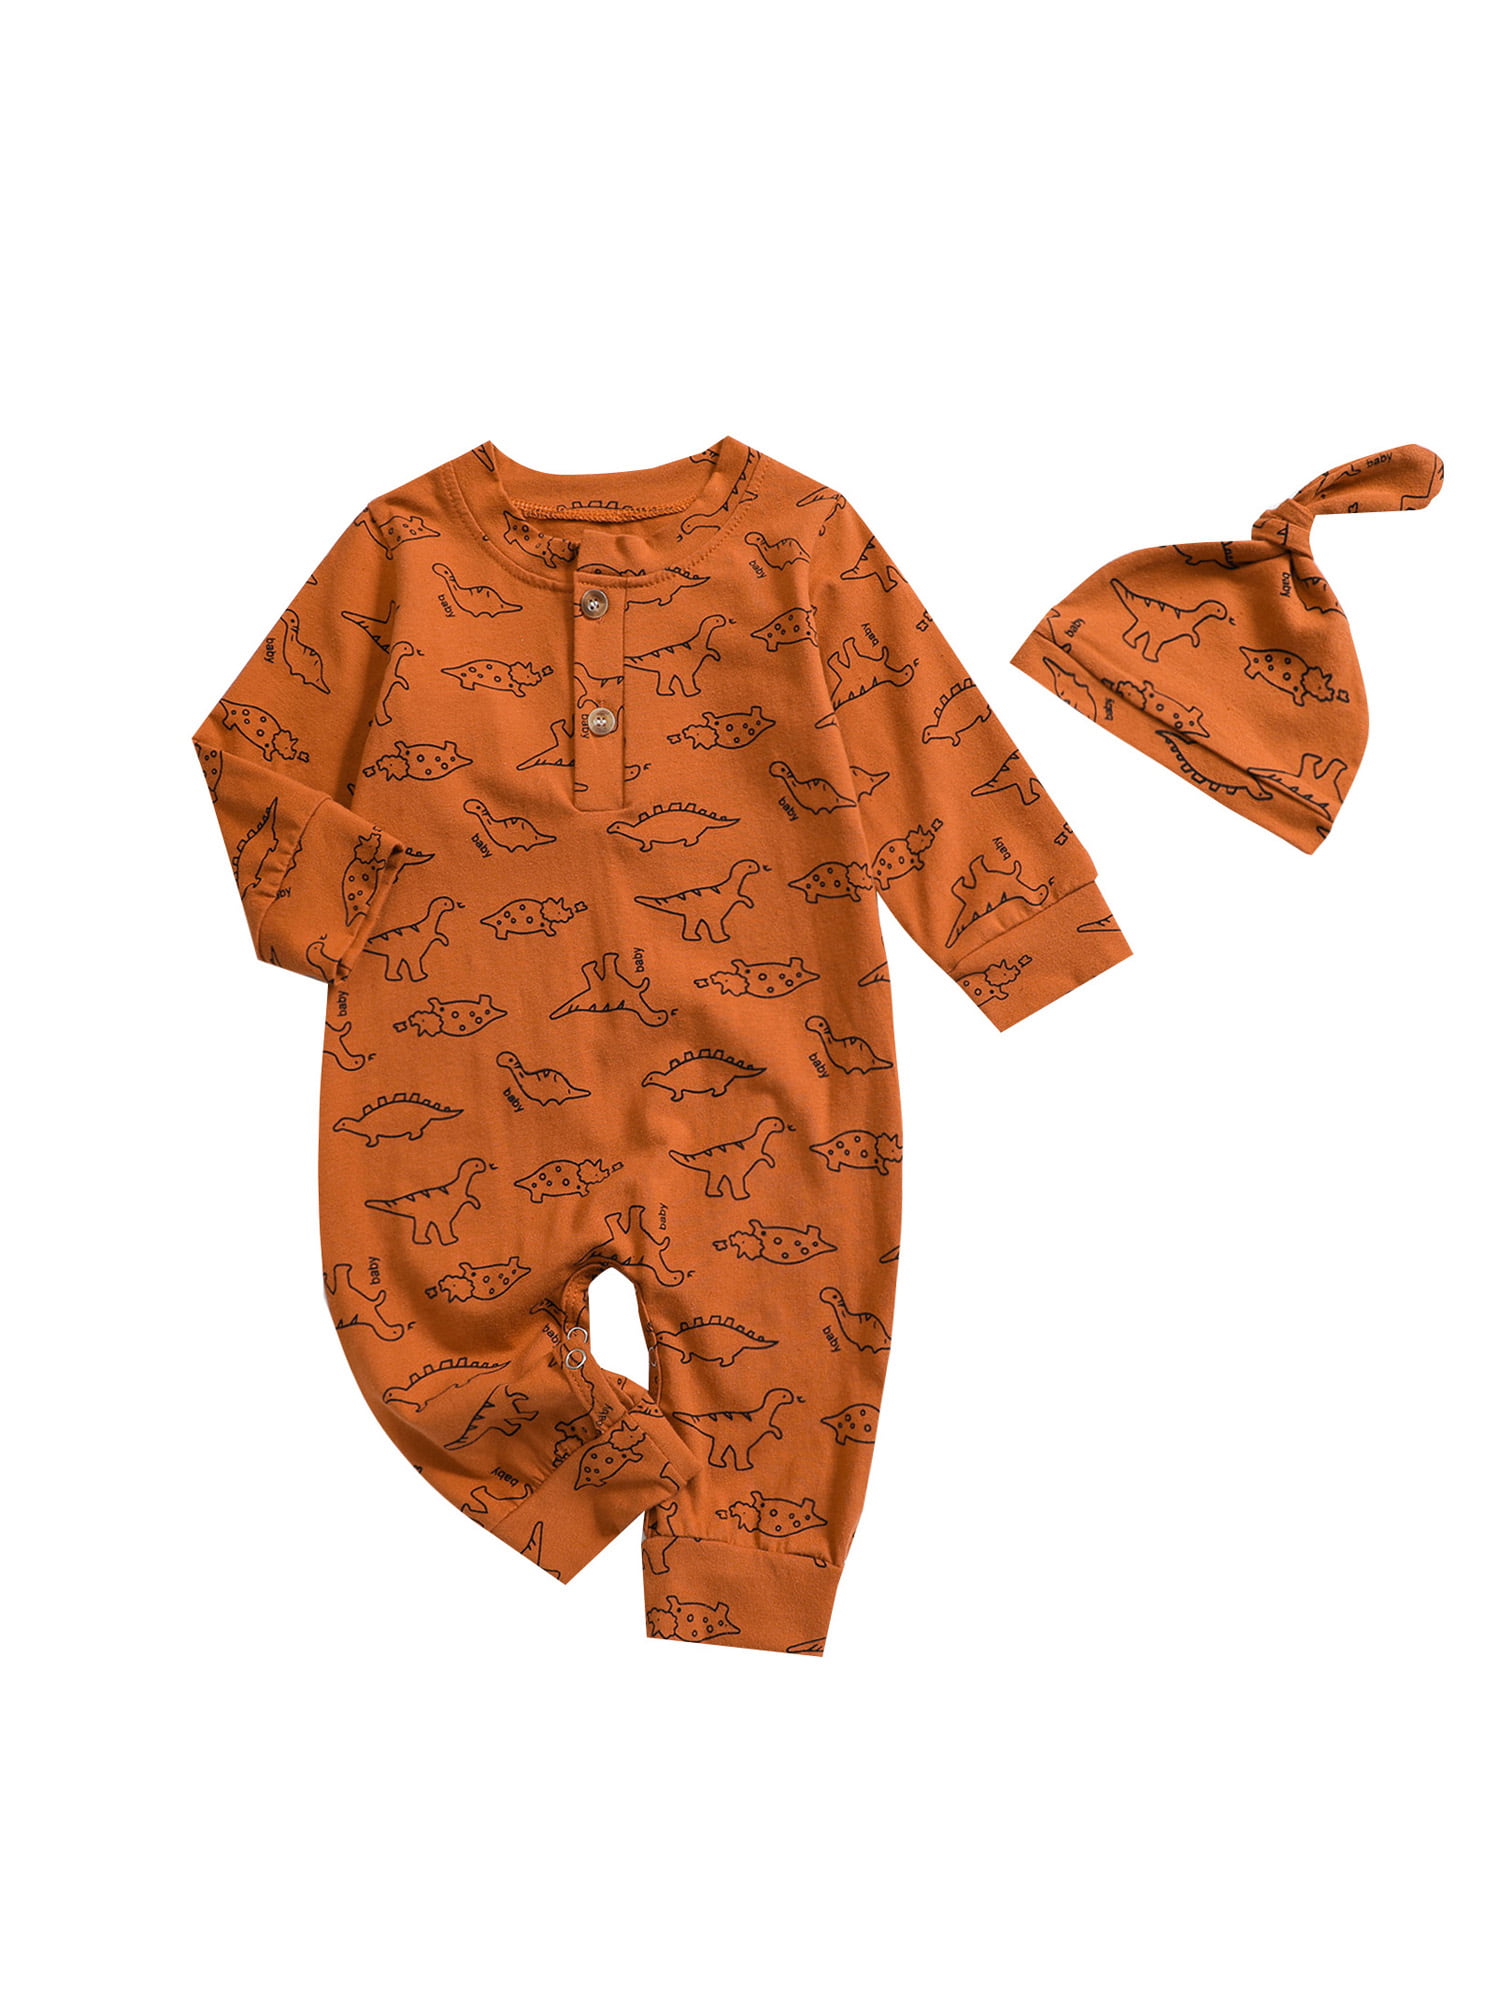 Baby Boy Girl Jumpsuit Long Sleeve Floral Cute Dinosaur Striped Dot Romper Onesies Pajamas Set Infant Toddler Outfits 